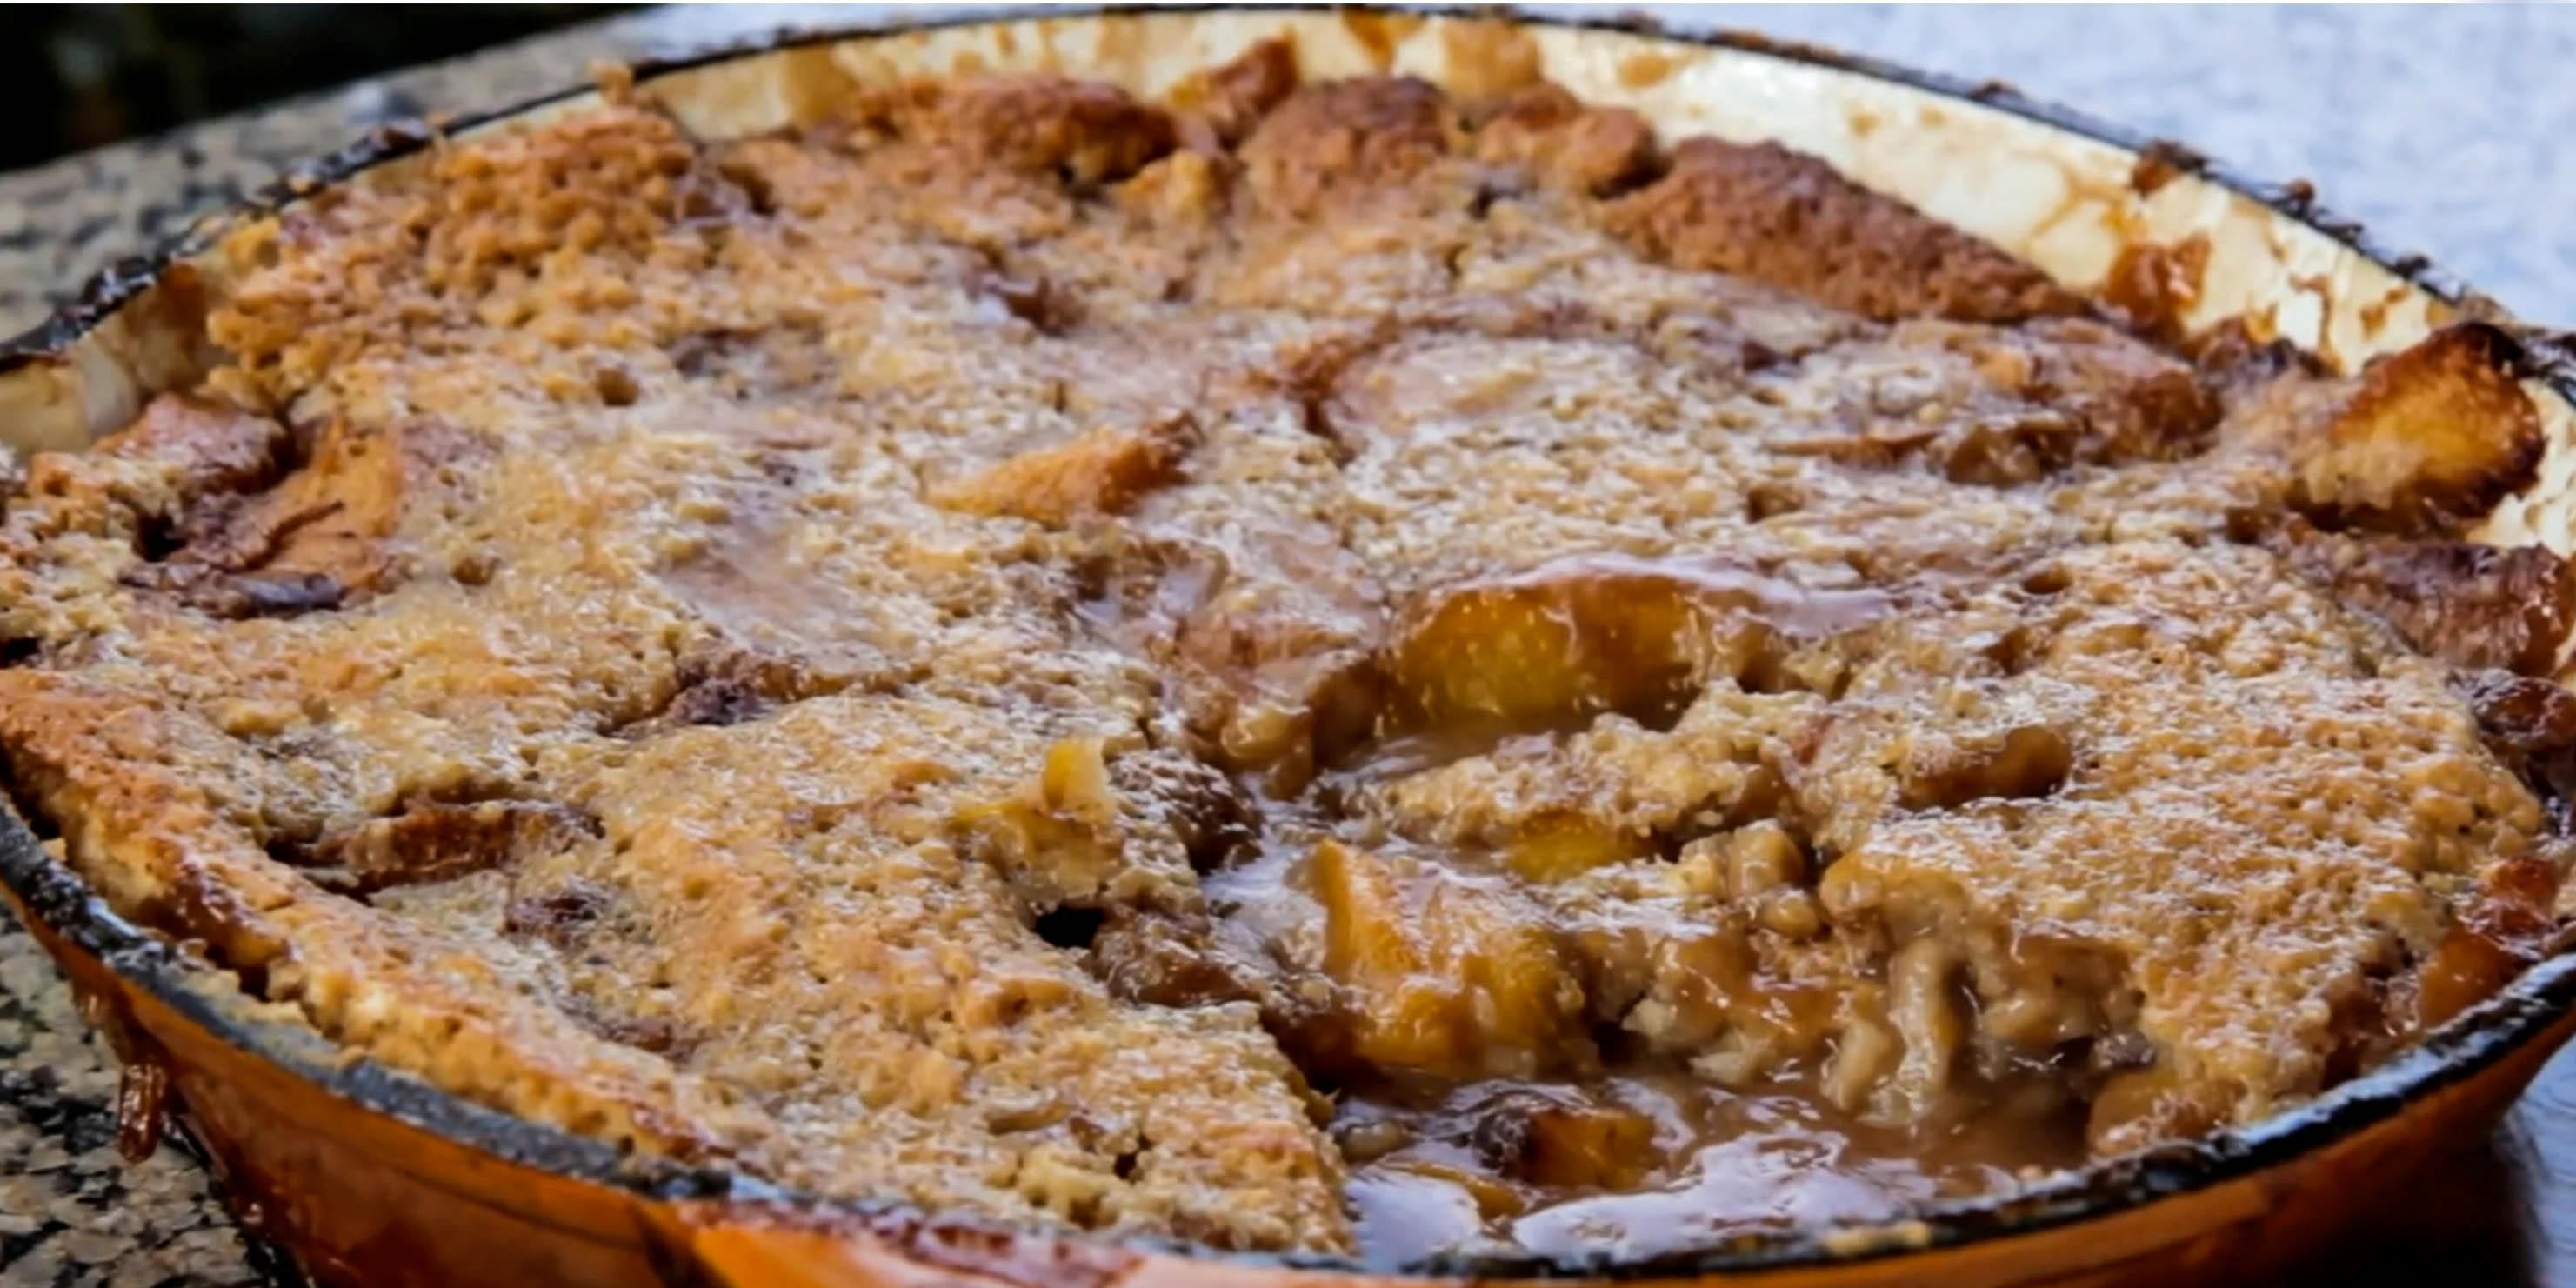 How To Make Cannabis-Infused Grilled Peach Cobbler